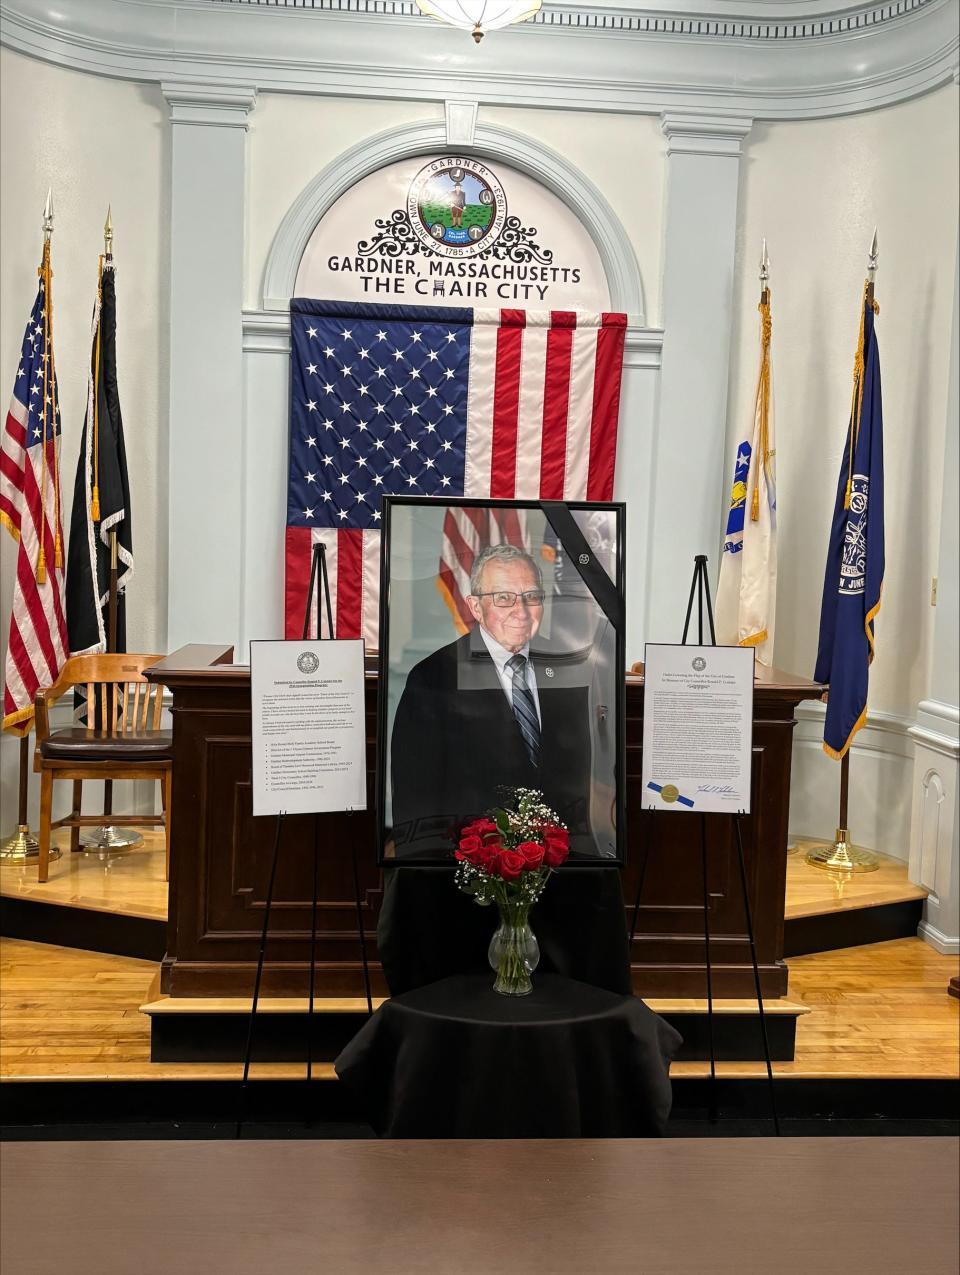 A portrait of City Councilor Ronald Cormier is displayed in the City Council Chambers at City Hall in Gardner. Cormier, the longest-serving councilor in the city's history, died on Sunday at the age of 81.